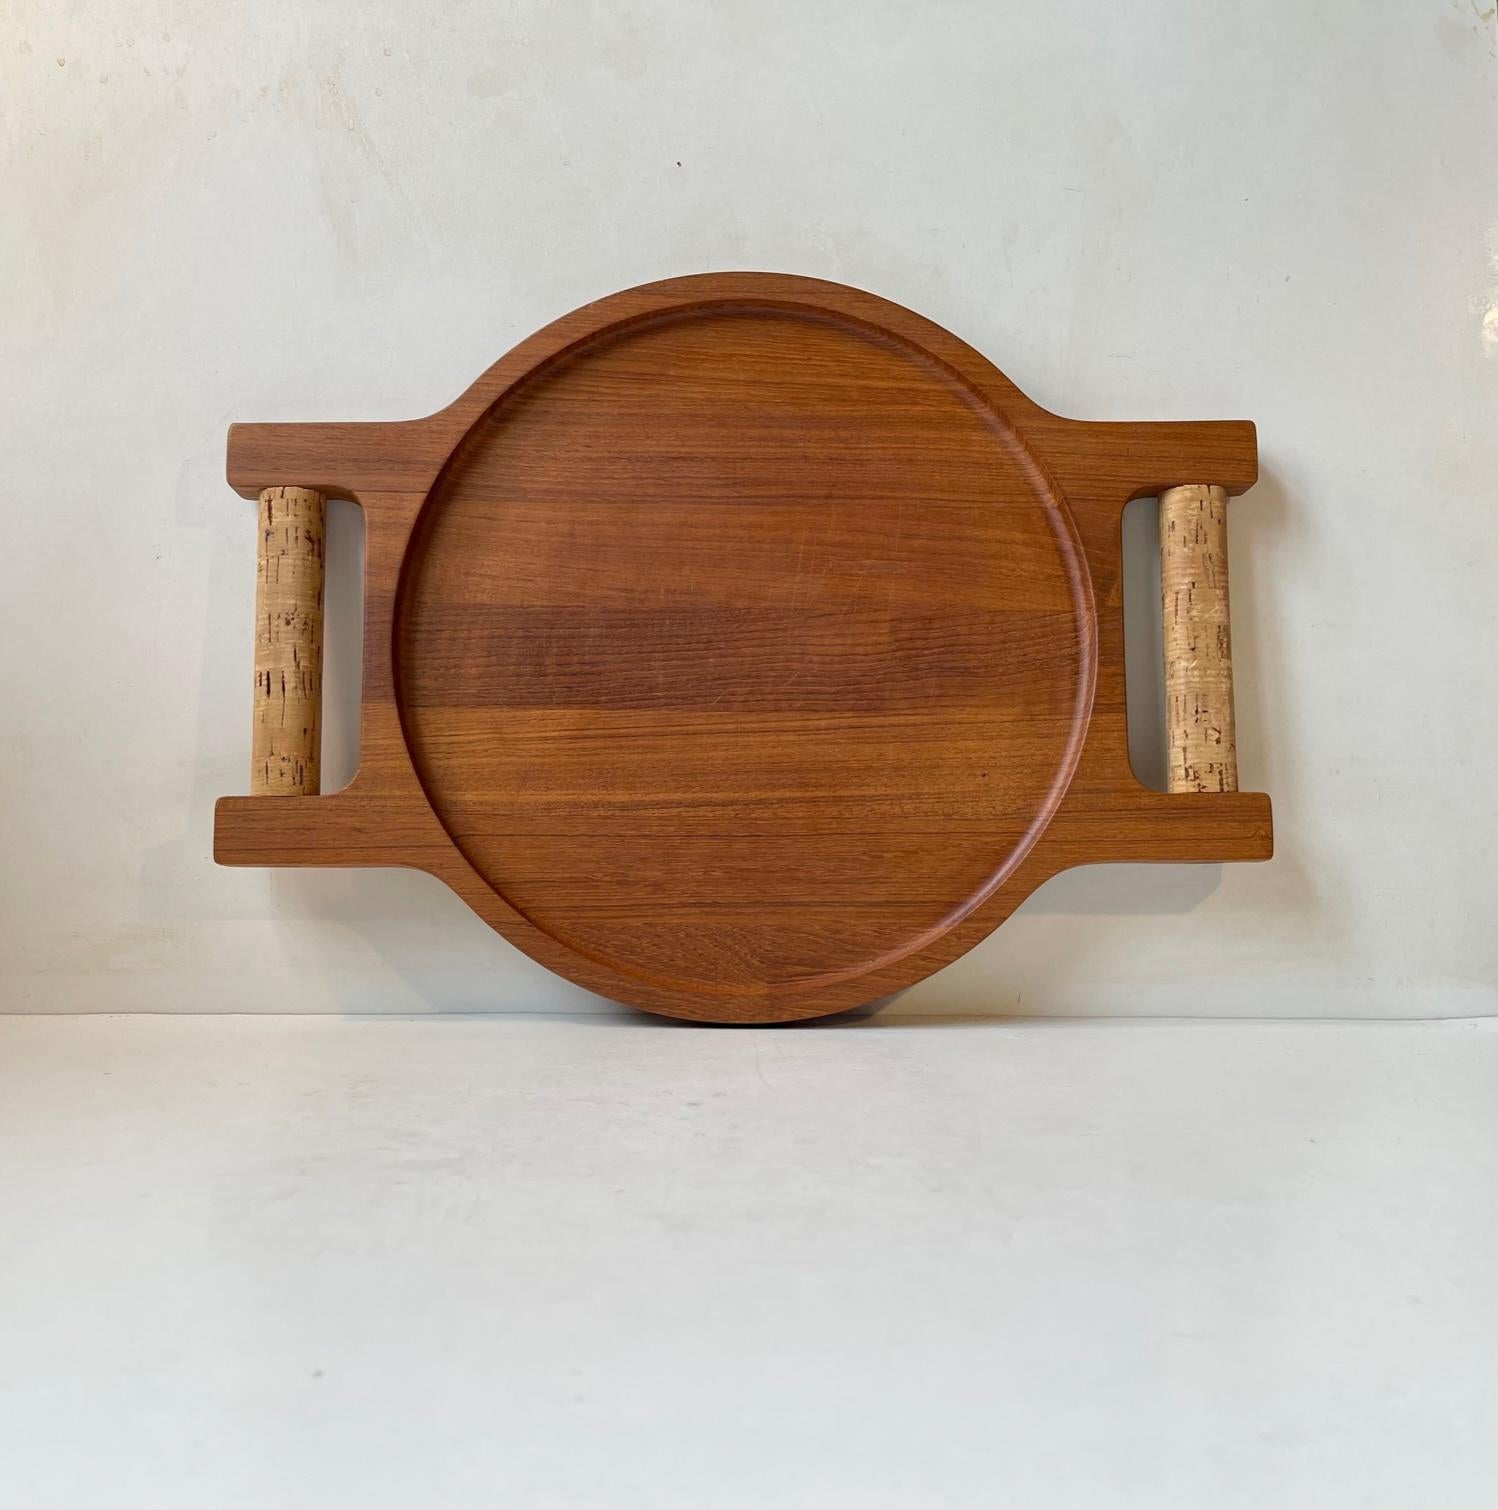 A rare double sided tray with serving tray to one side and cutting board to the other. Its made from solid teak partially stacked to display the wooden grains and its assembled without the use of any metal. It features stylish solid cork handles.